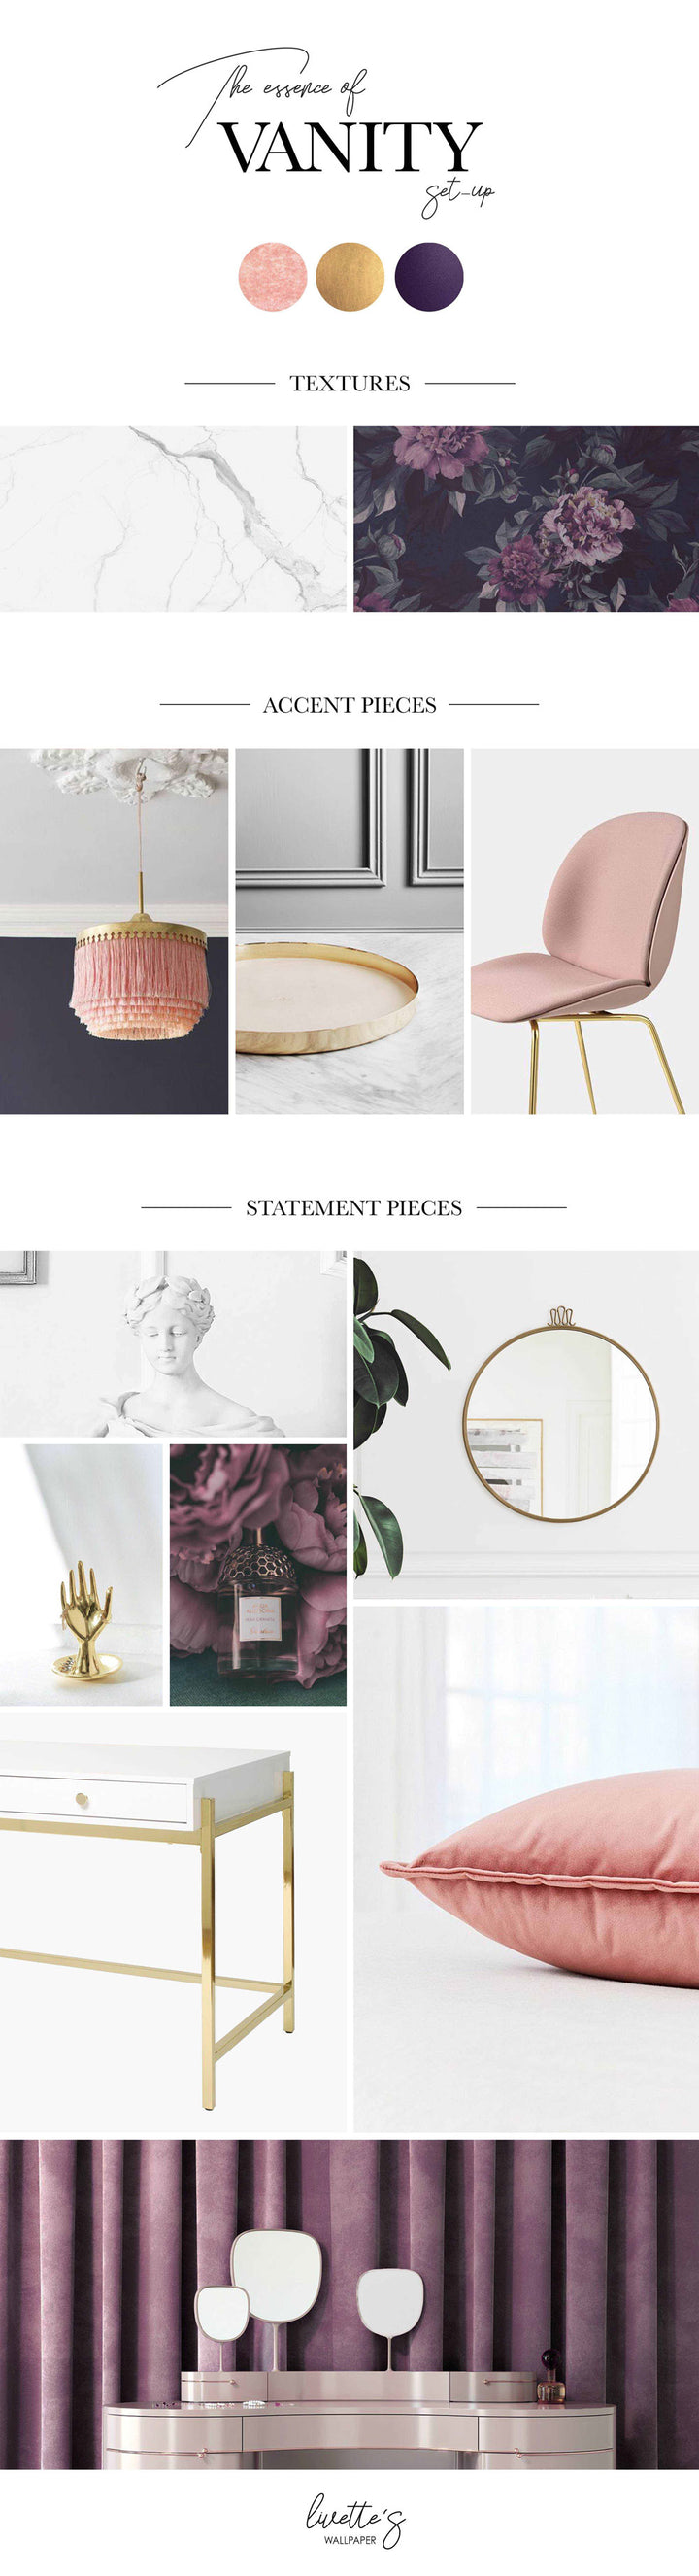 Interior mood board with dark floral and marble patterns, pink lamp, chair and velvet pillow